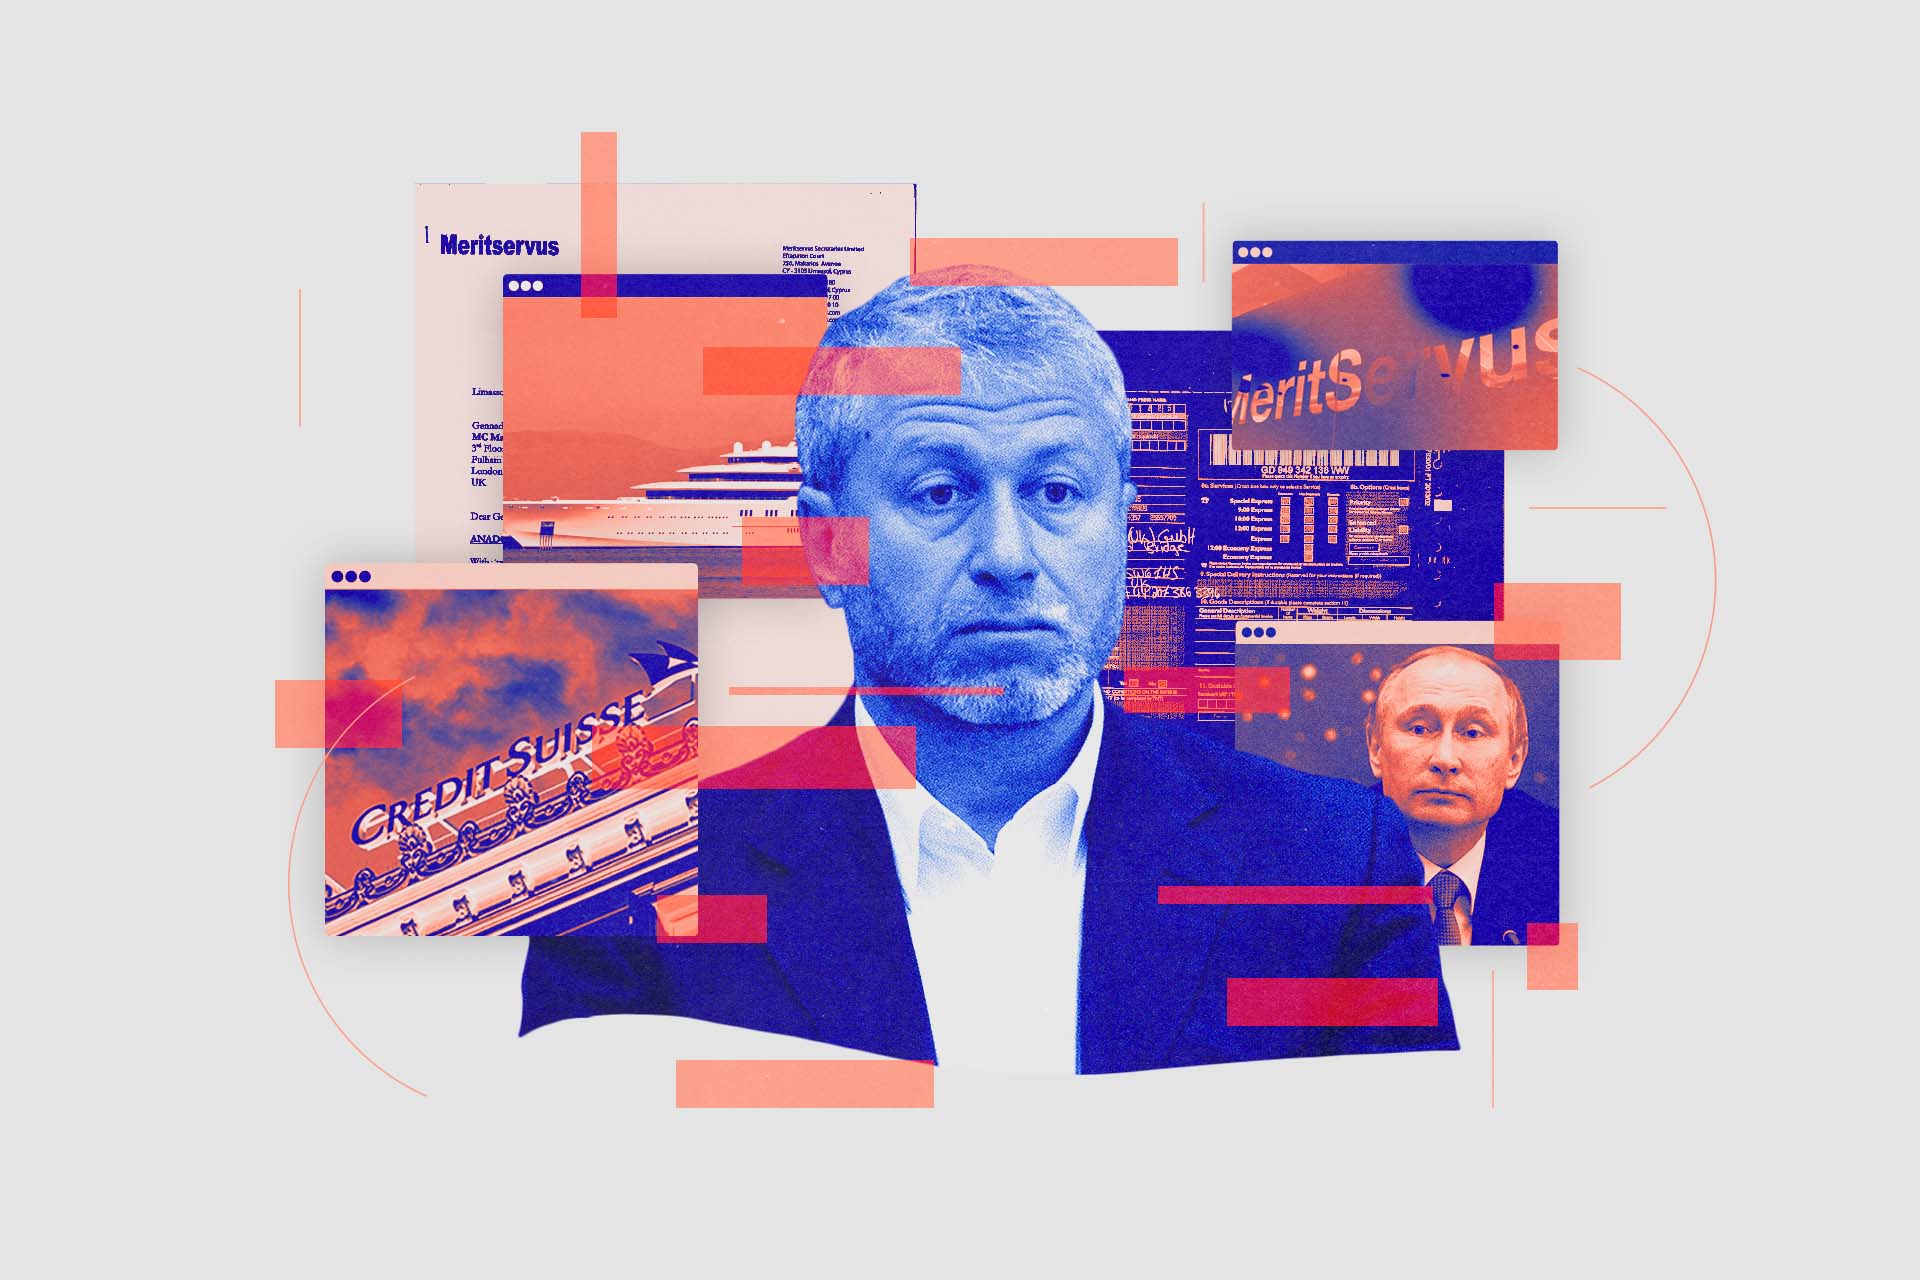 Credit Suisse Banked Abramovich Fortune Held in Secret Offshore Companies